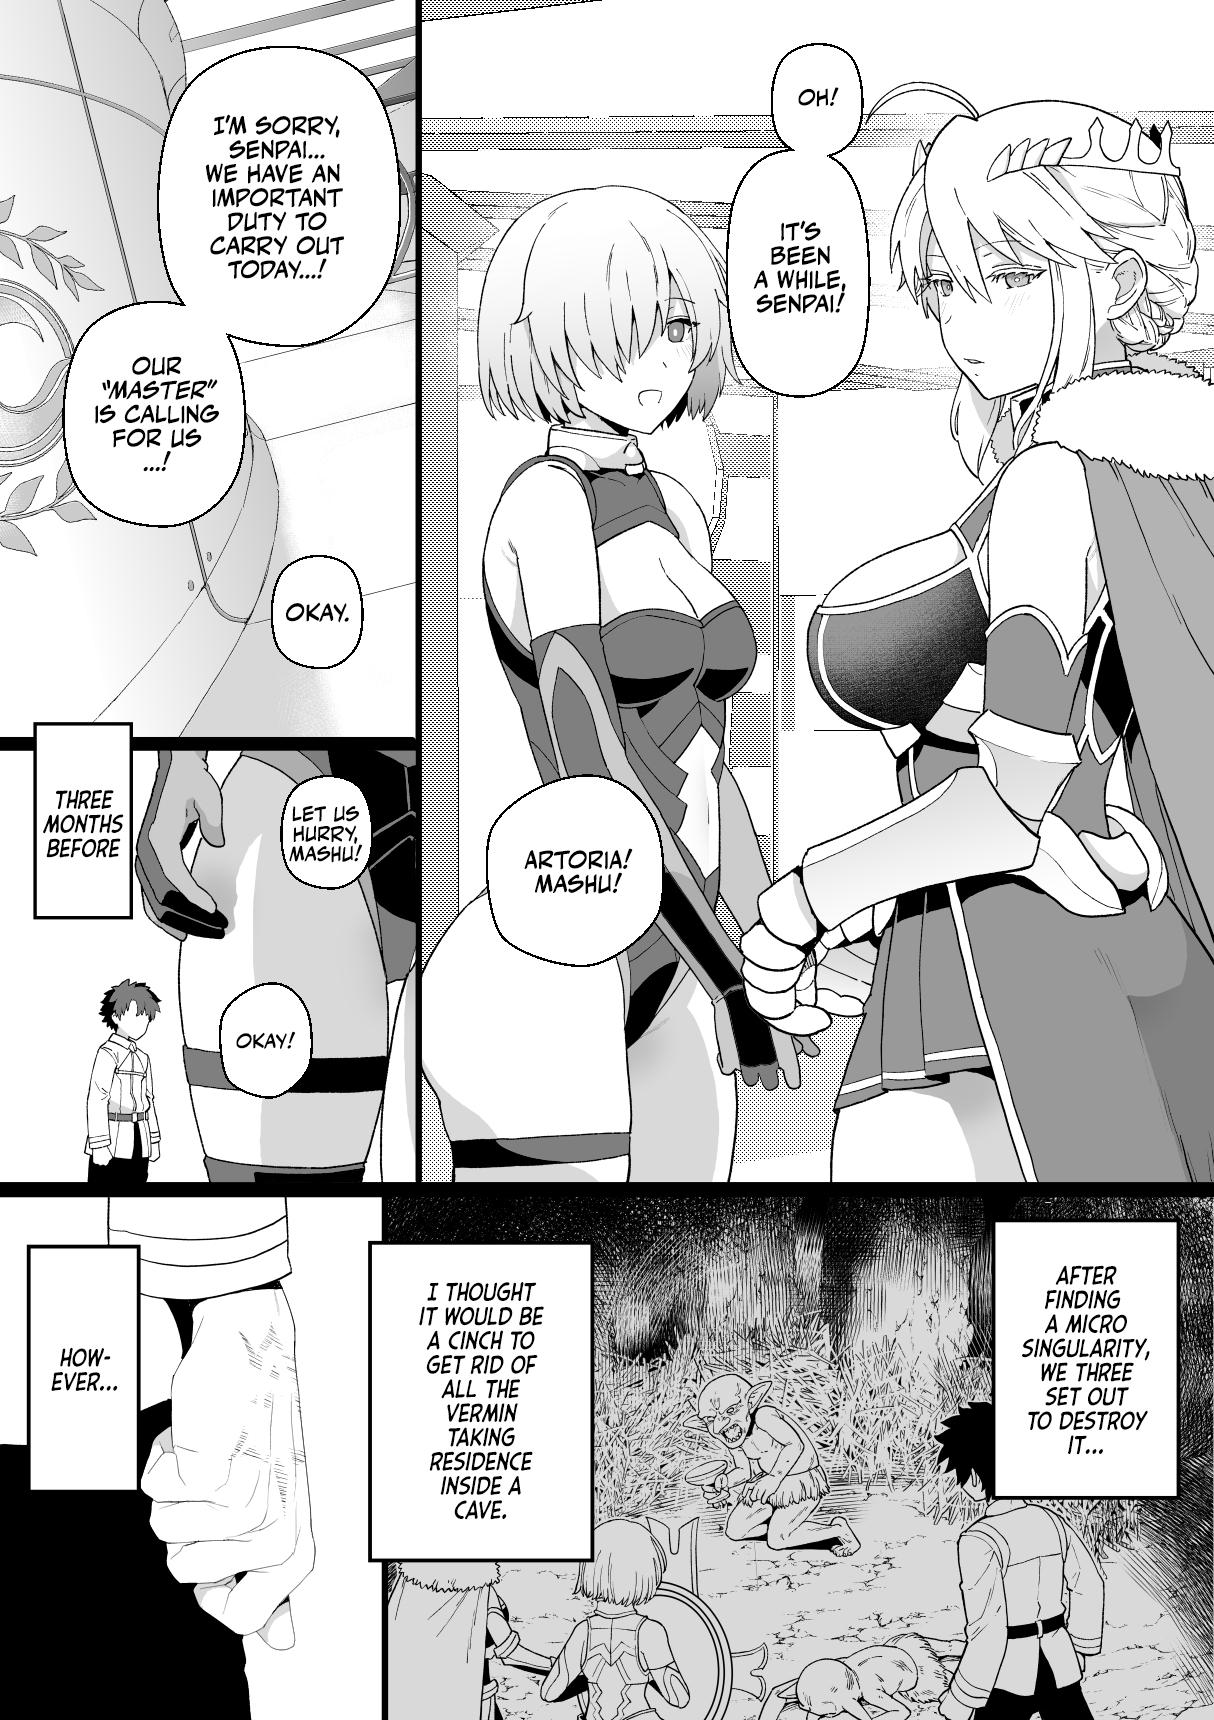 Amateur Sex Artoria to Mash, Goblin Kan Manga | Artoria and Mashu Violated by a Goblin! - Fate grand order Hot Naked Women - Picture 1